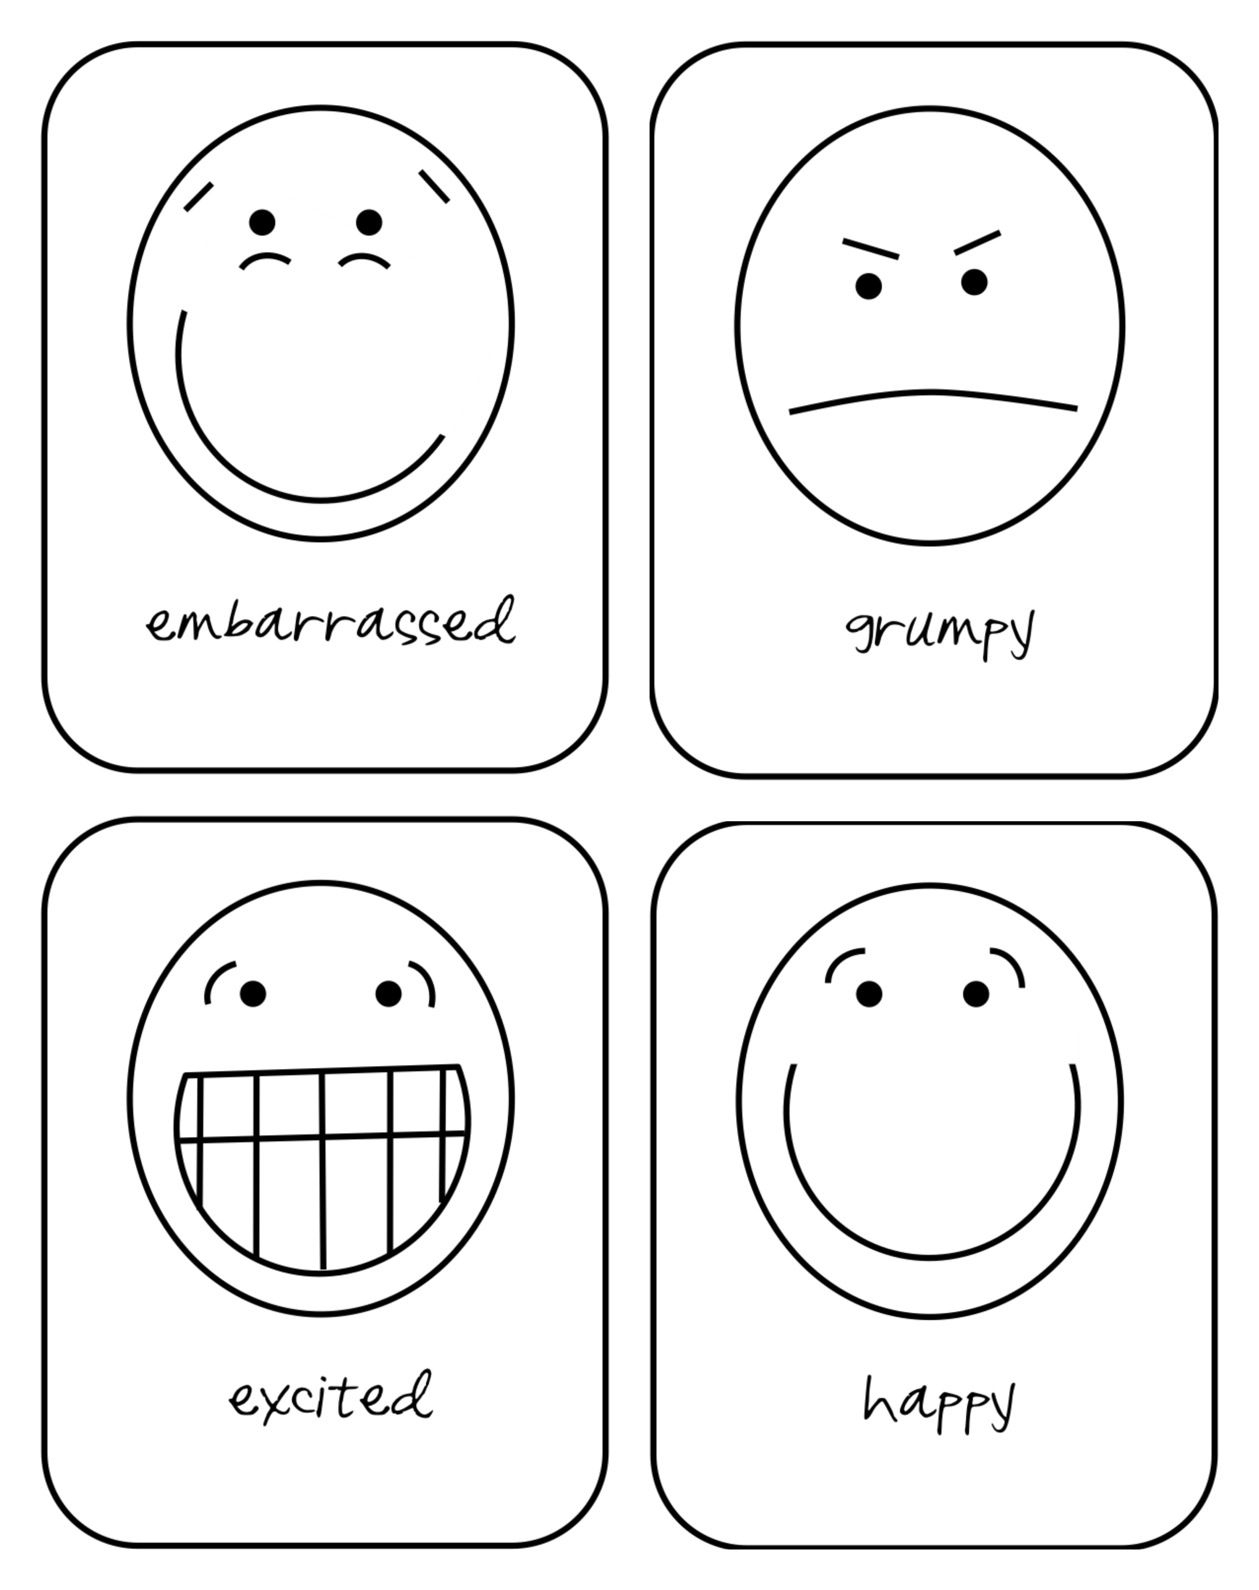 Free Printable Emotion Flash Cards For Your Toddler | Hopes And - Free Printable Pictures Of Emotions